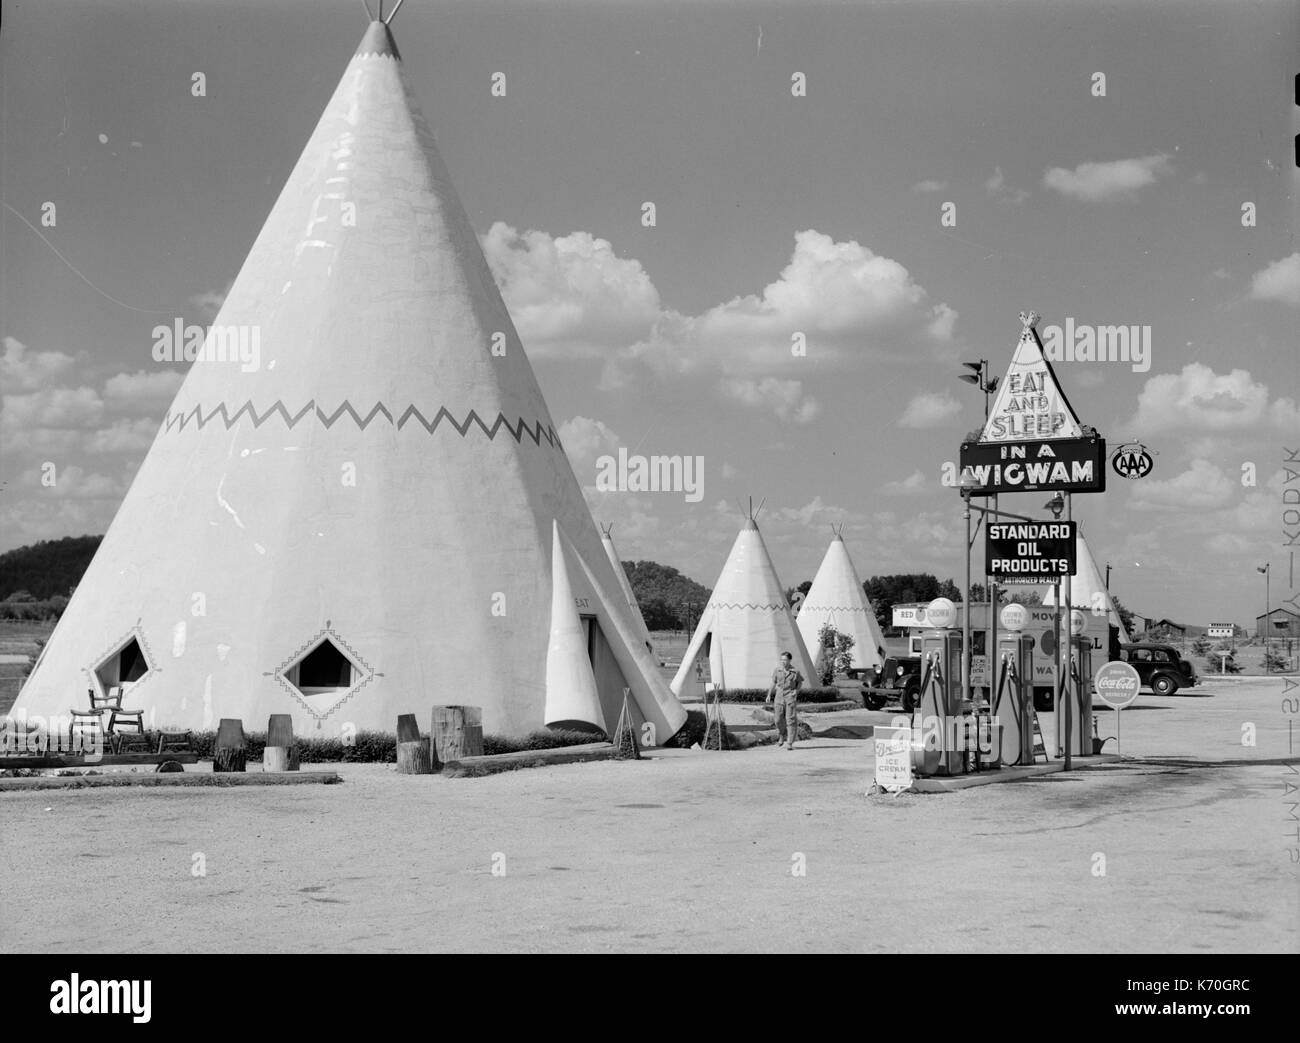 July 1940, Bardstown, Kentucky - Cabins imitating the Indian teepee for tourists along highway. Photo by Marion Post Wolcott. July 1940, Bardstown, Kentucky. Stock Photo